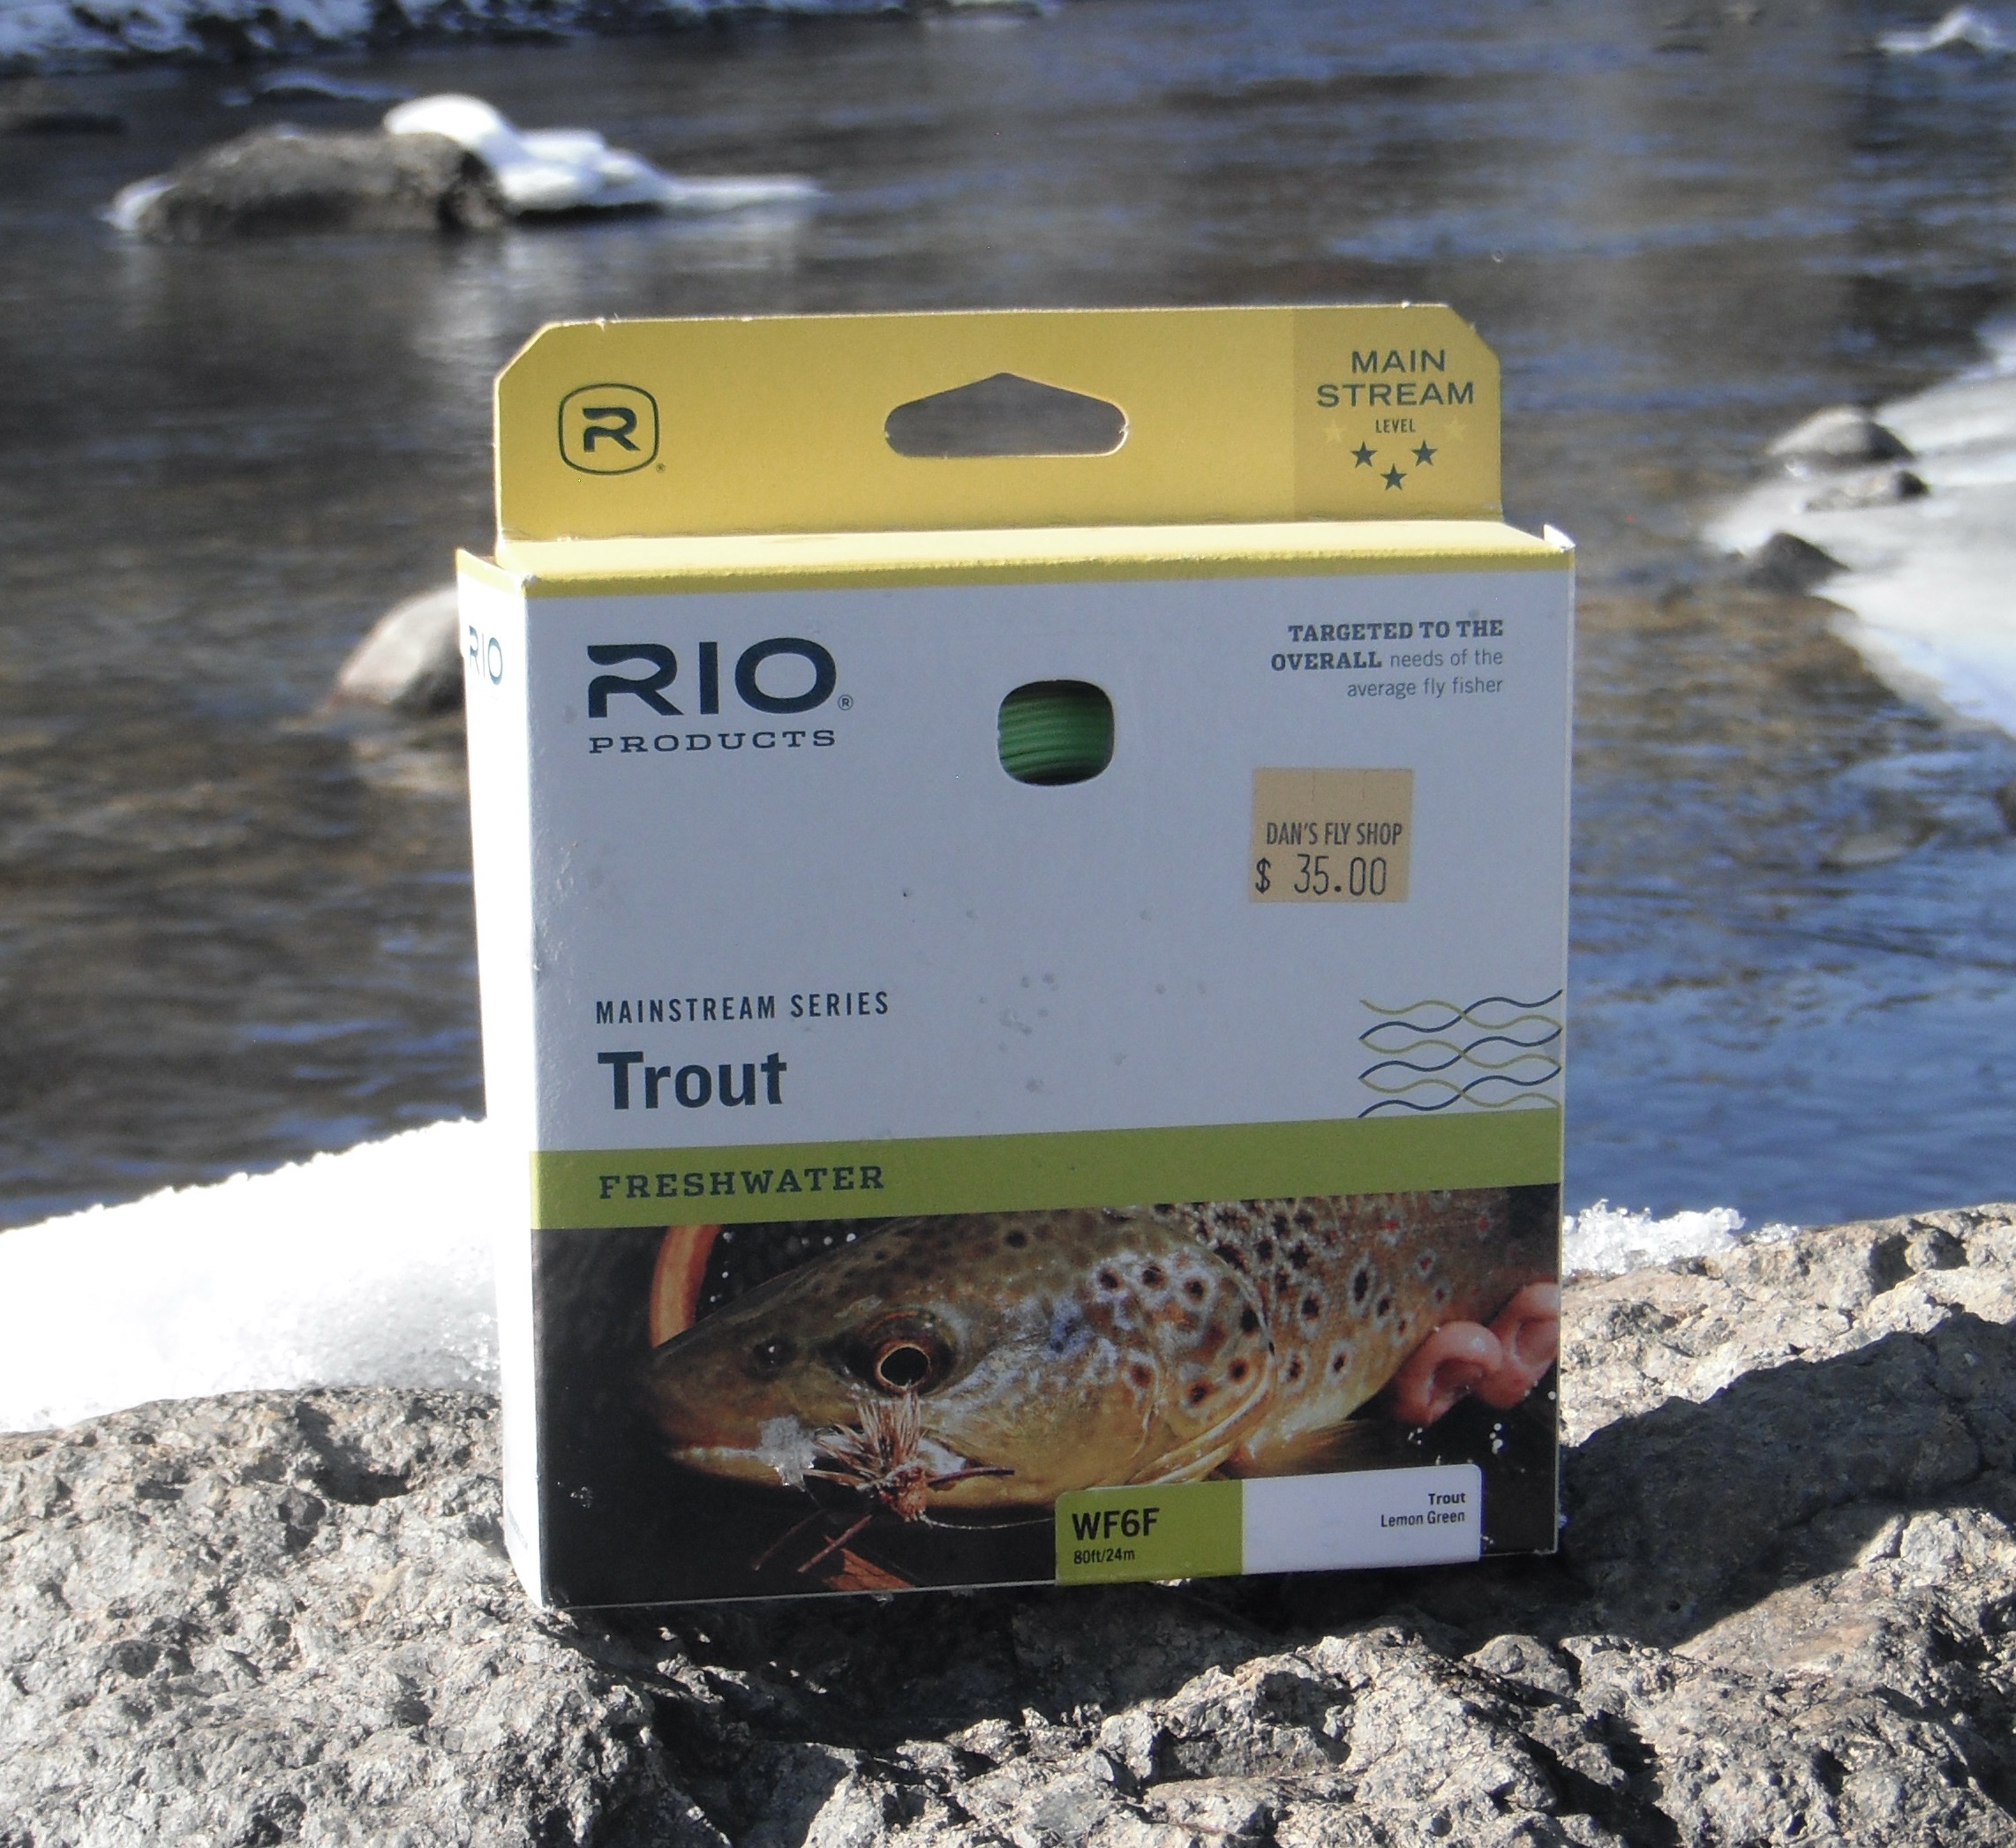 RIO - Trout LT Weight Forward Fly Line